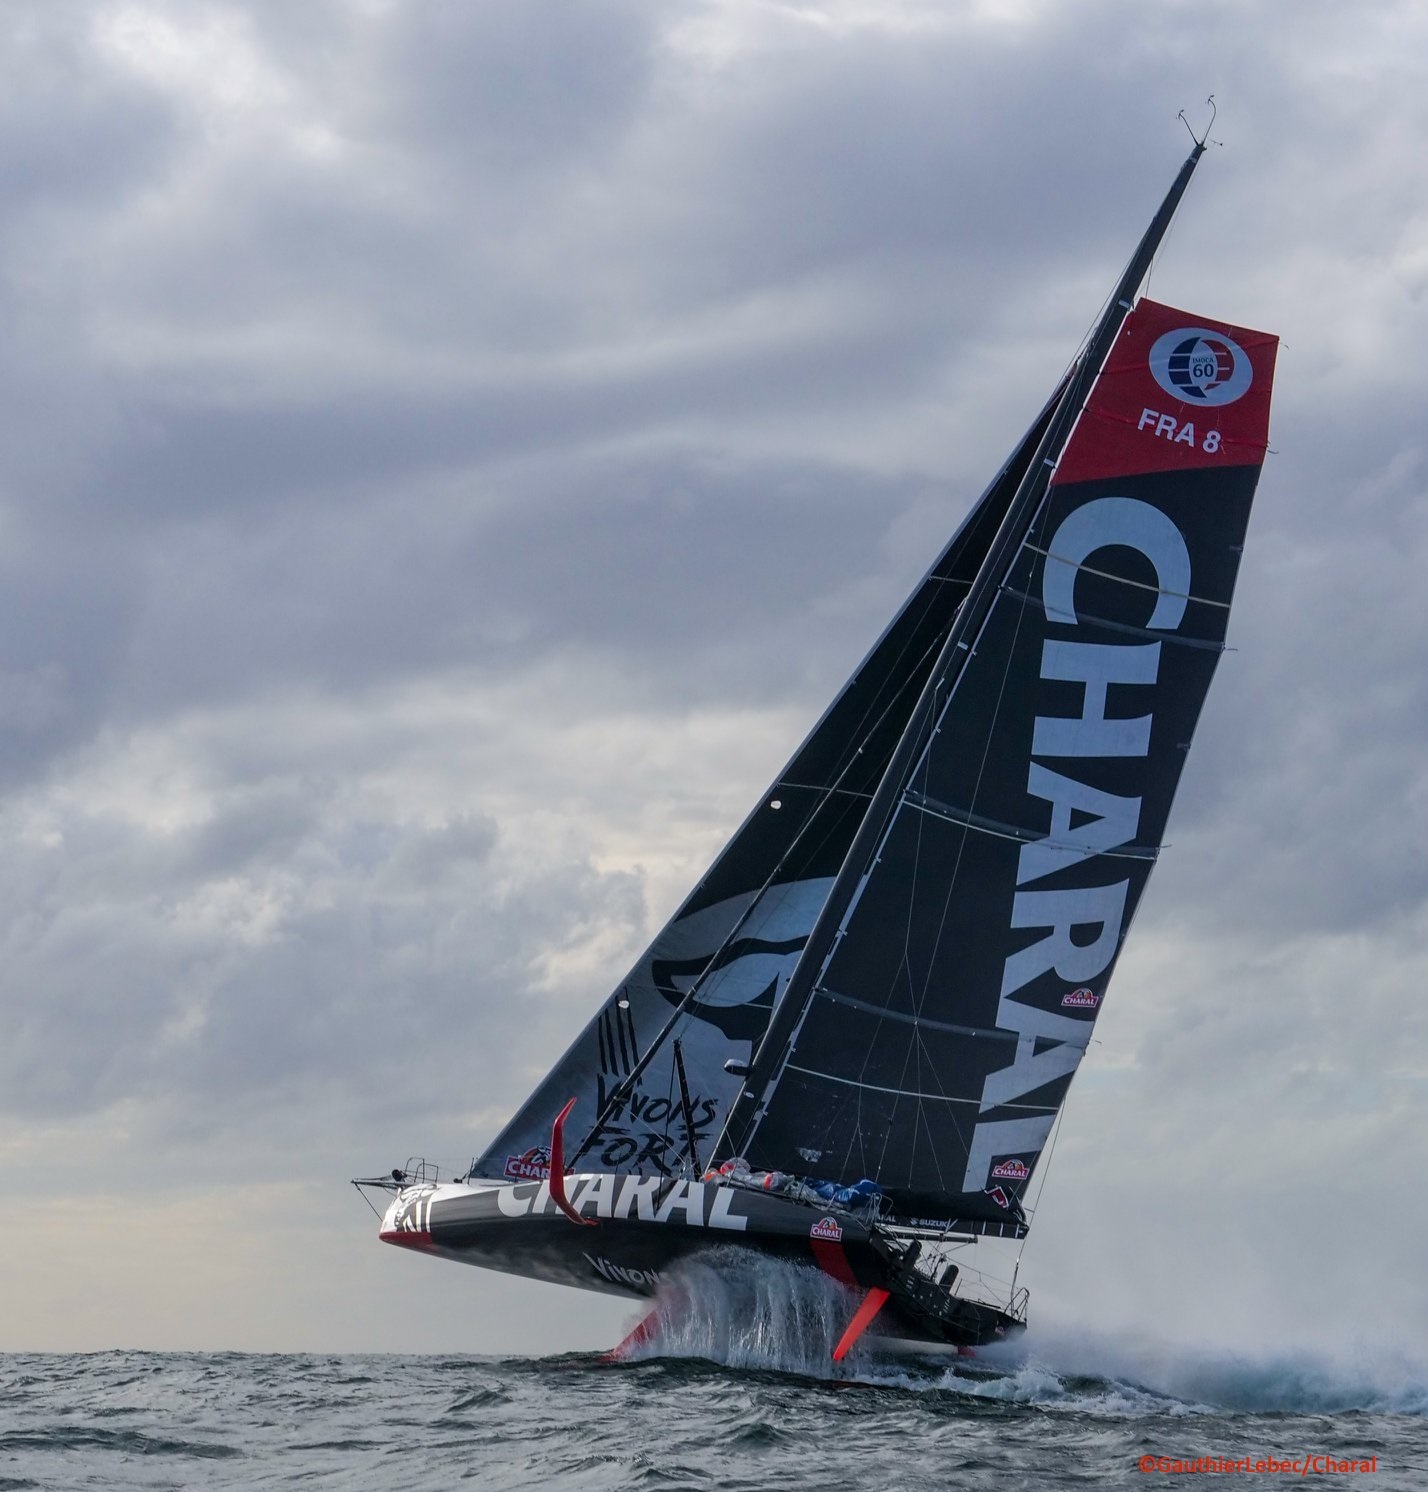 Imoca Charal Foiling - carbon racing boat